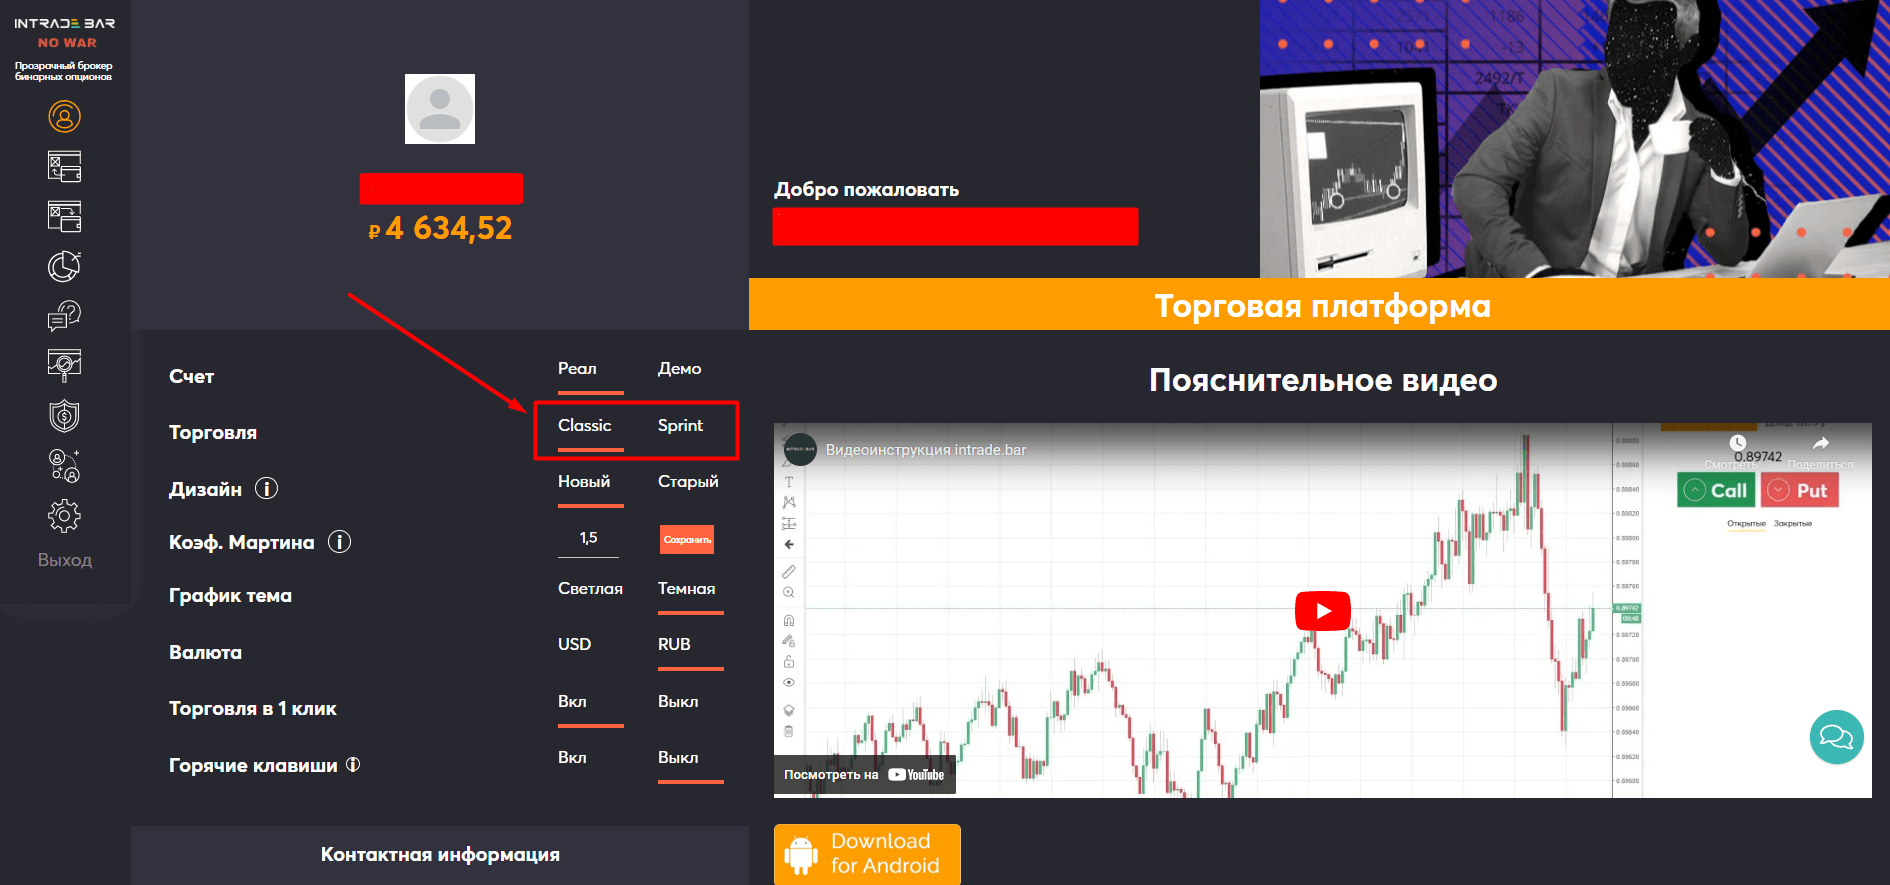 Selecting a trading mode on Intrade.Bar